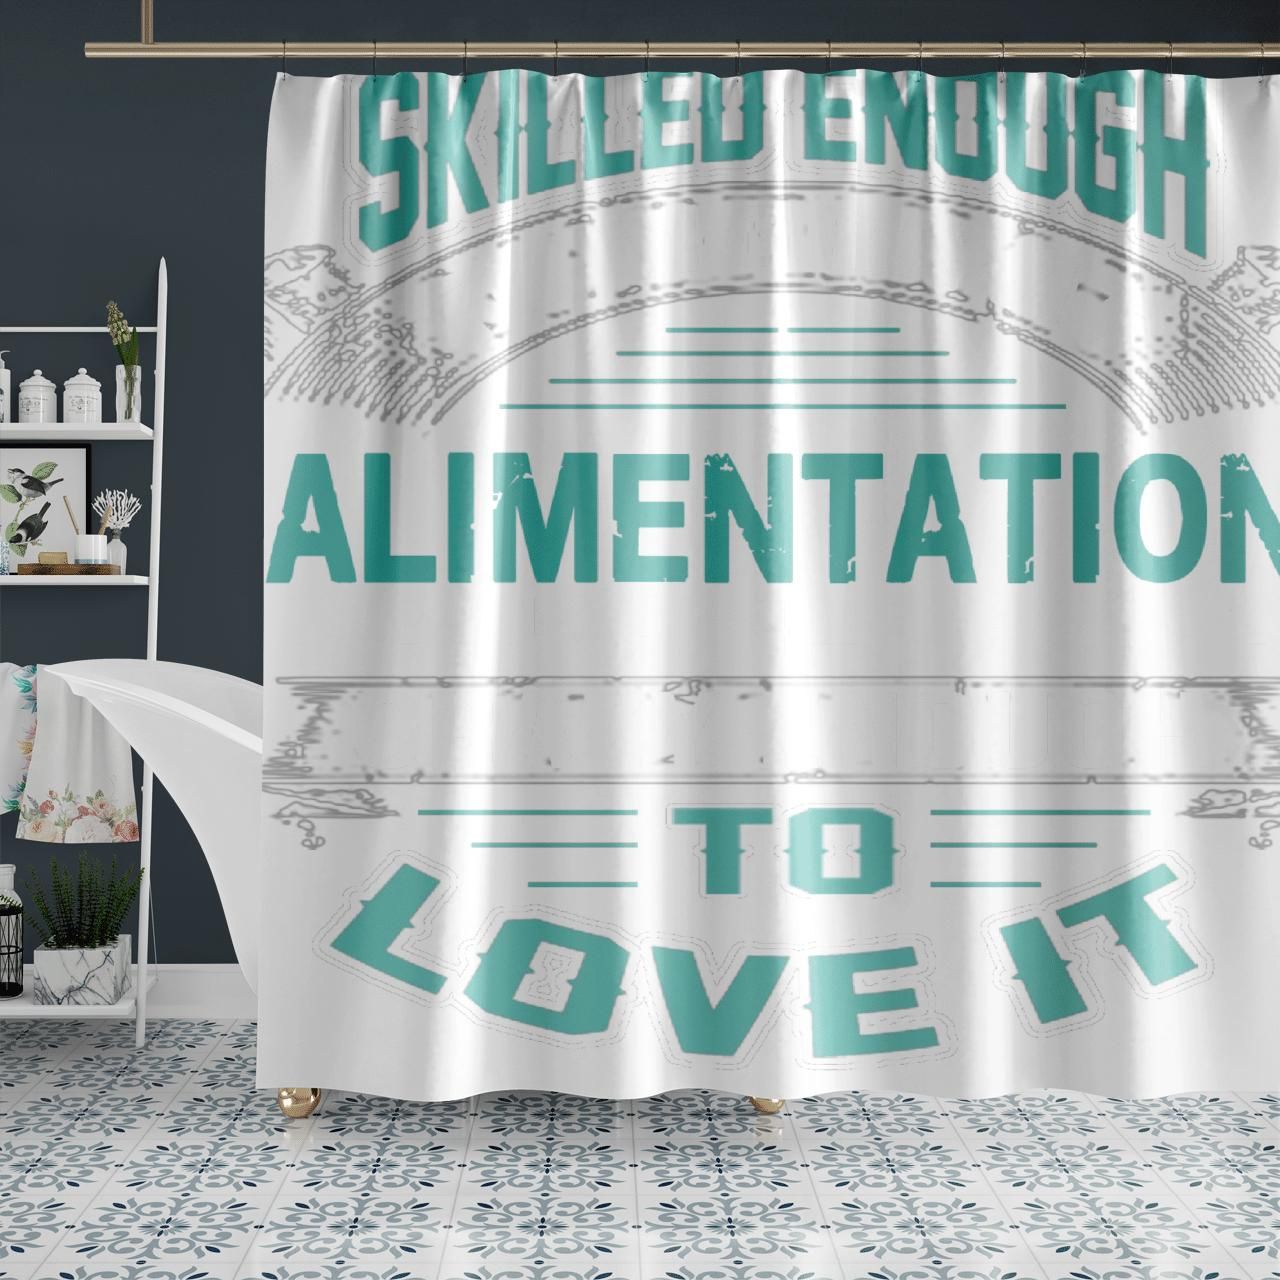 Skilled Enough To Work At Alimentation Couche Tard Crazy Enough To Love It Shower Curtain